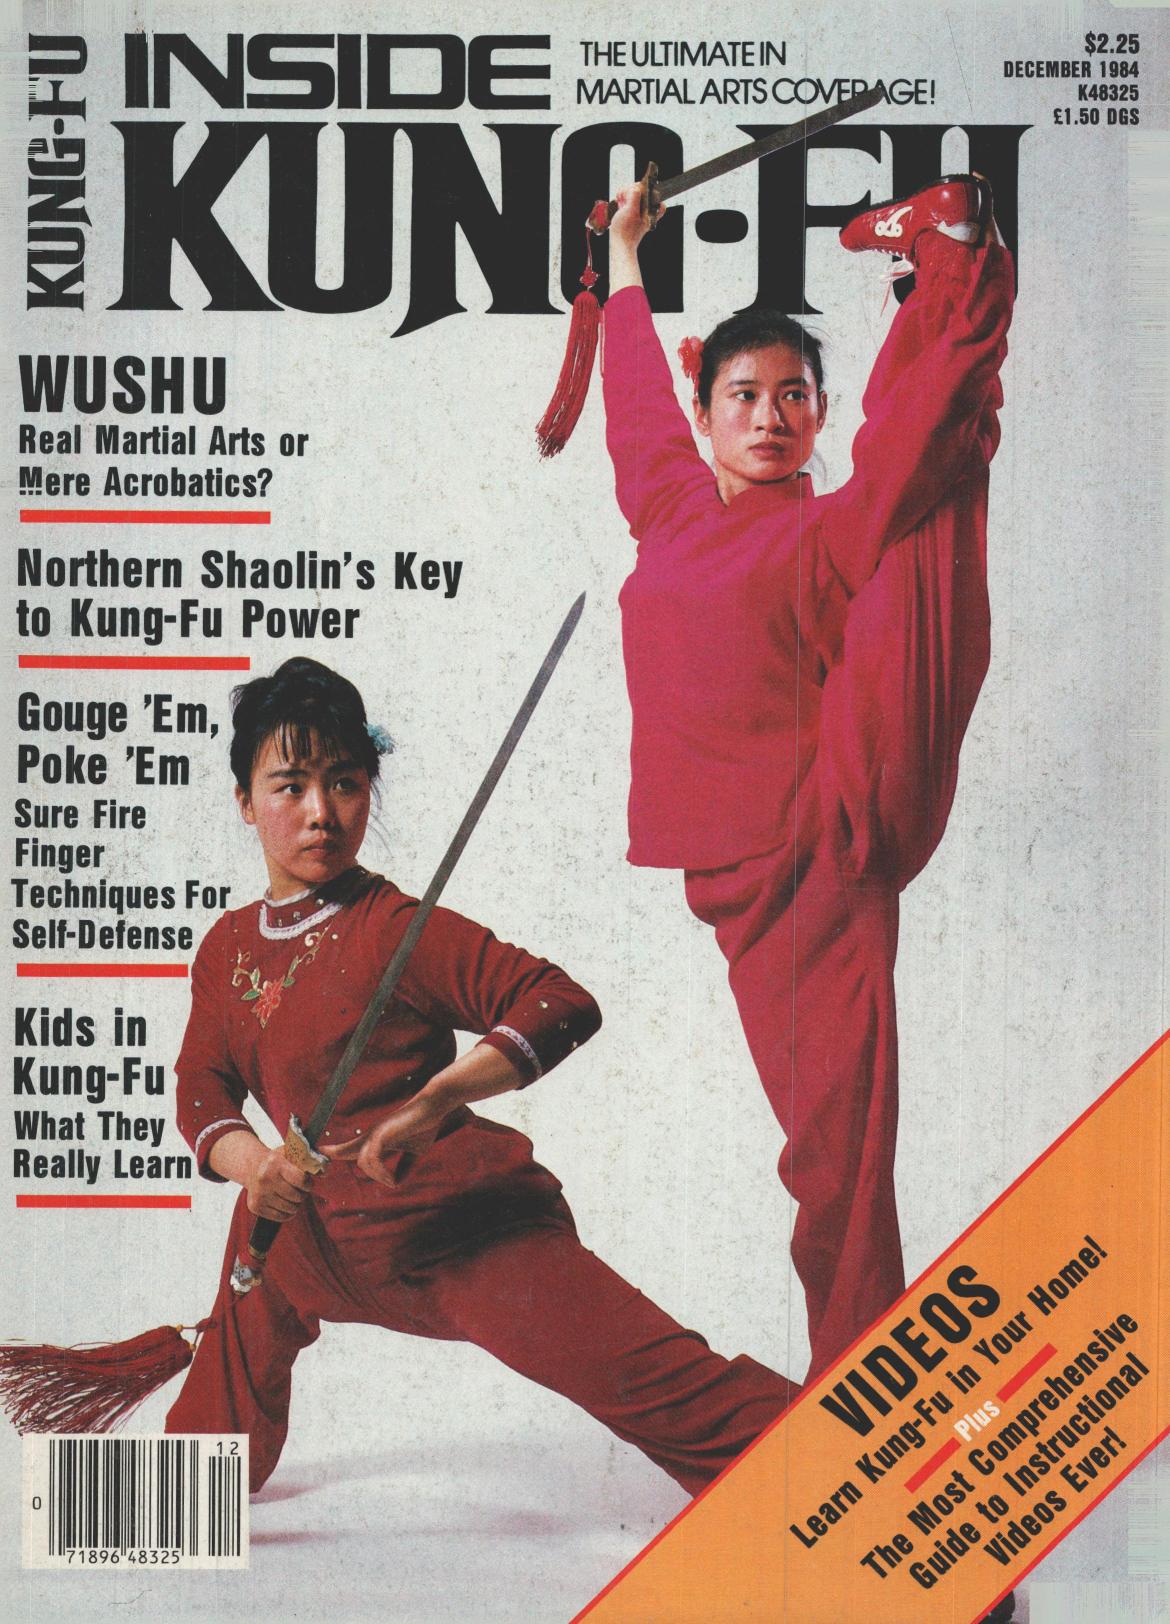 Inside Kung Fu Magazine December 1984 84/12   *COLLECTIBLE*